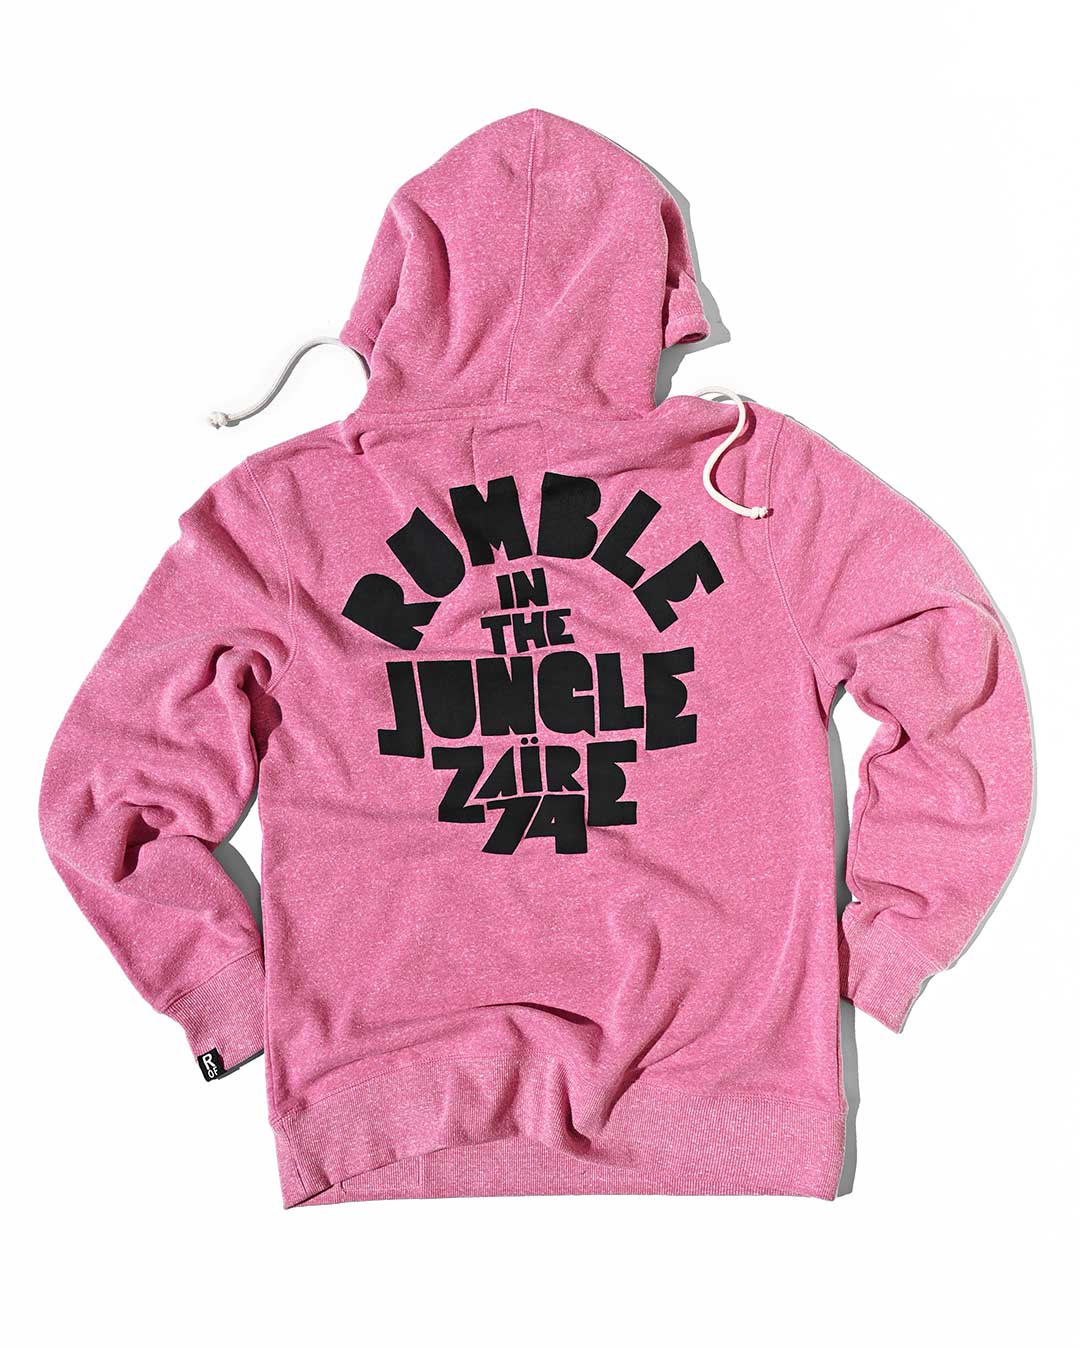 Ali Rumble in the Jungle Pink Hoody - Roots of Fight